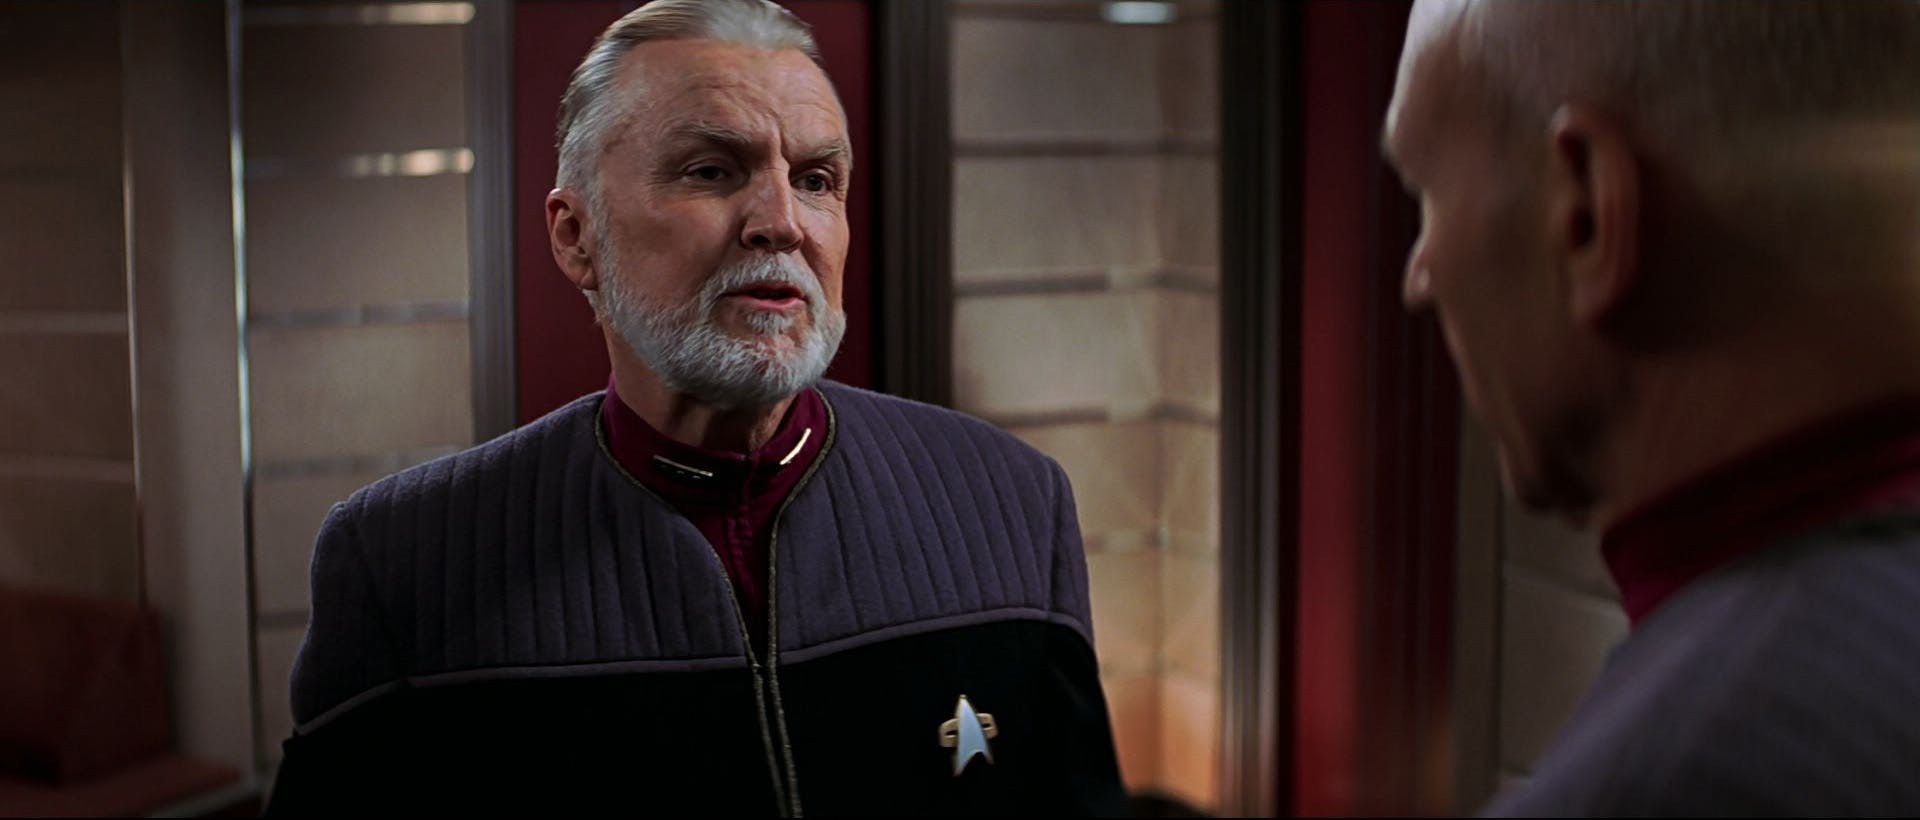 Admiral Dougherty approaches Picard in the captain's ready room in Star Trek: Insurrection